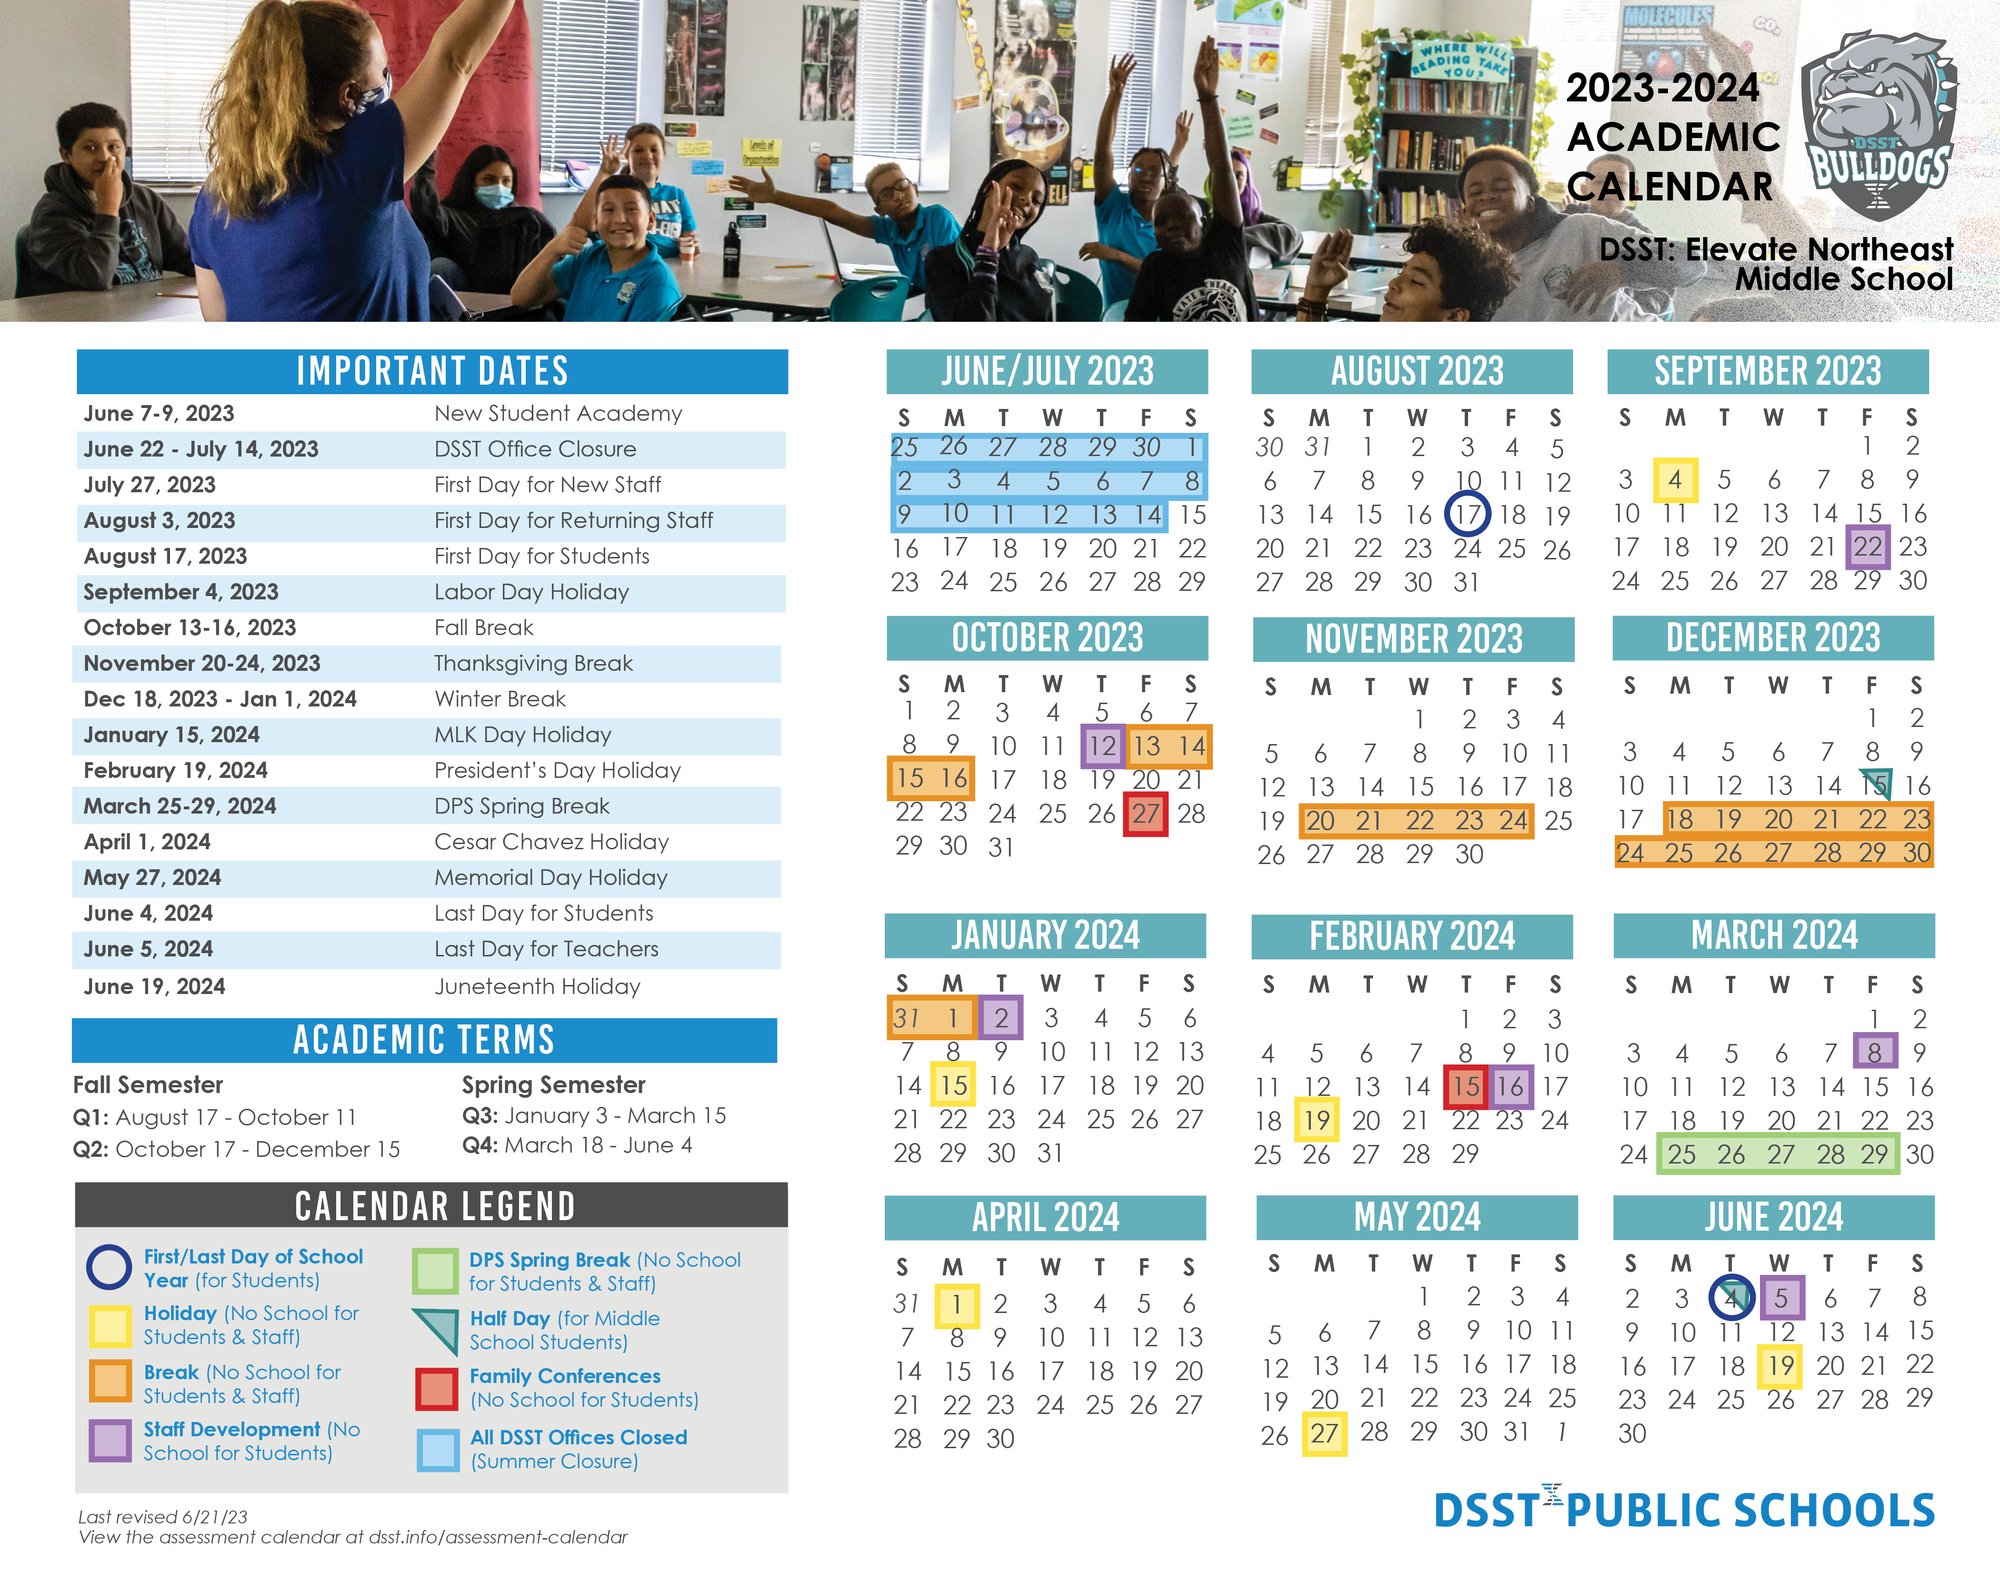 Elevate MS Calendar 23-24 English and Spanish 6.21.23